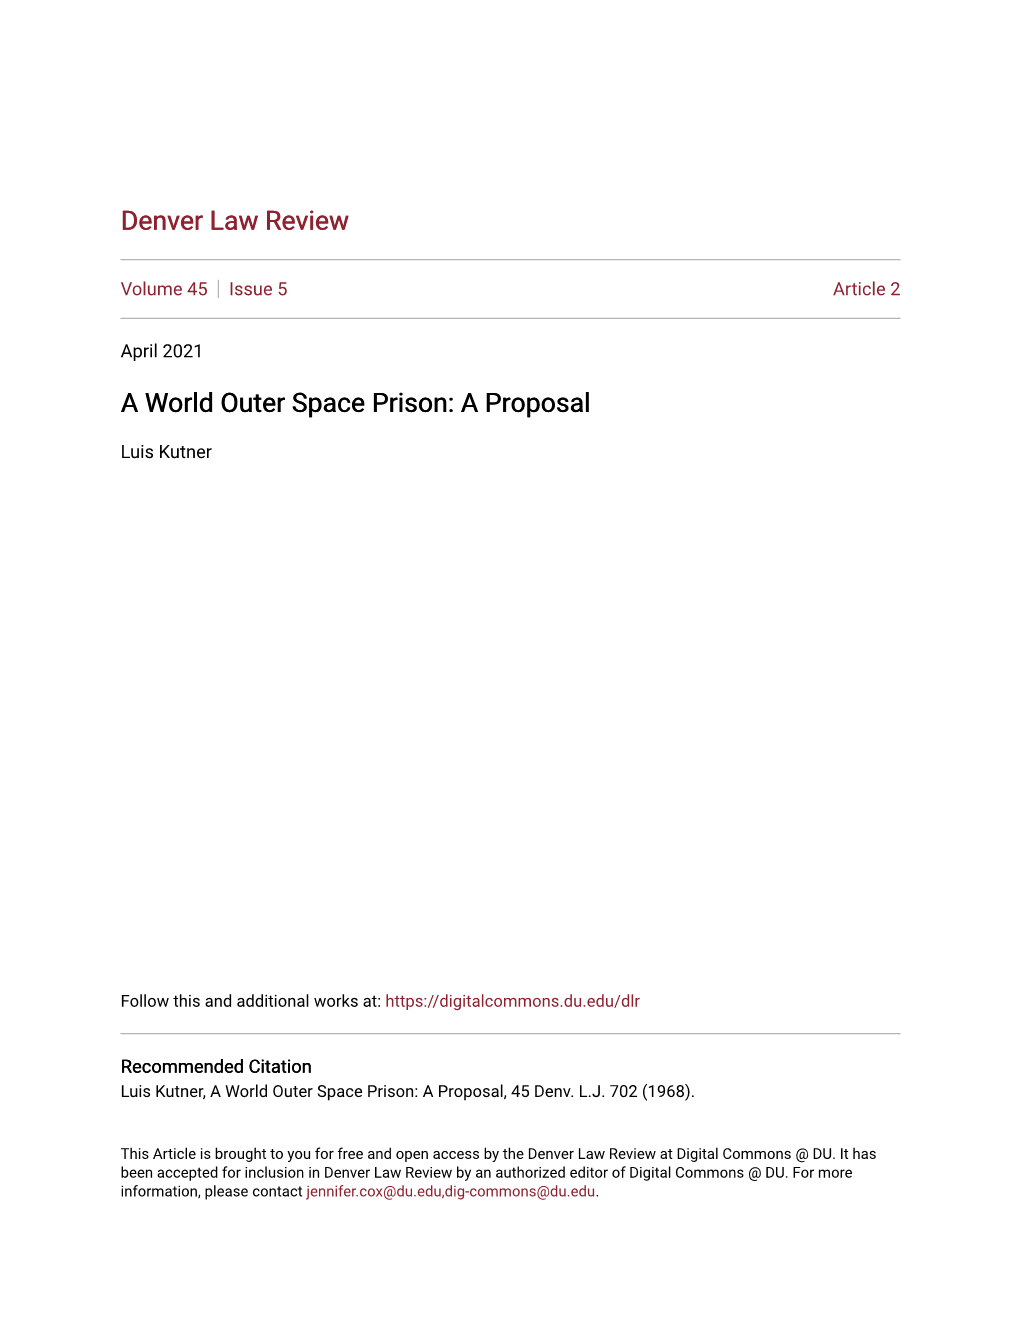 A World Outer Space Prison: a Proposal